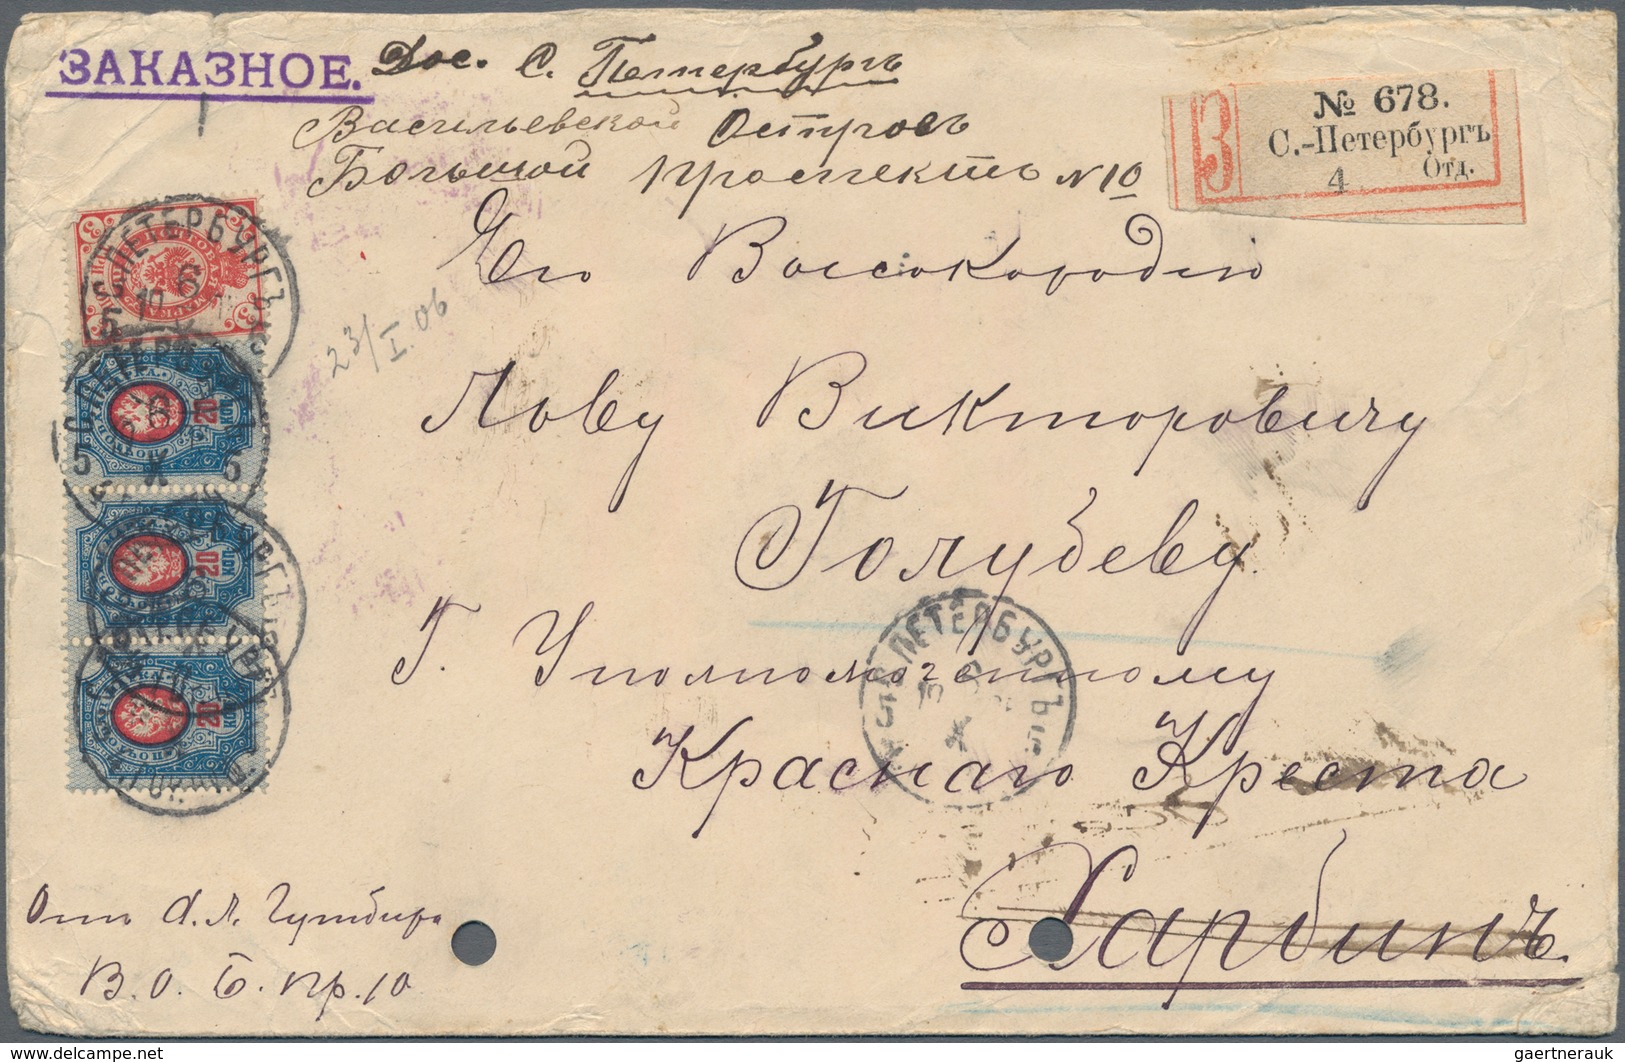 Russische Post In China: 06.10.1904 Russo-Japanese War Registered Cover From St. Petersburg To Red C - China